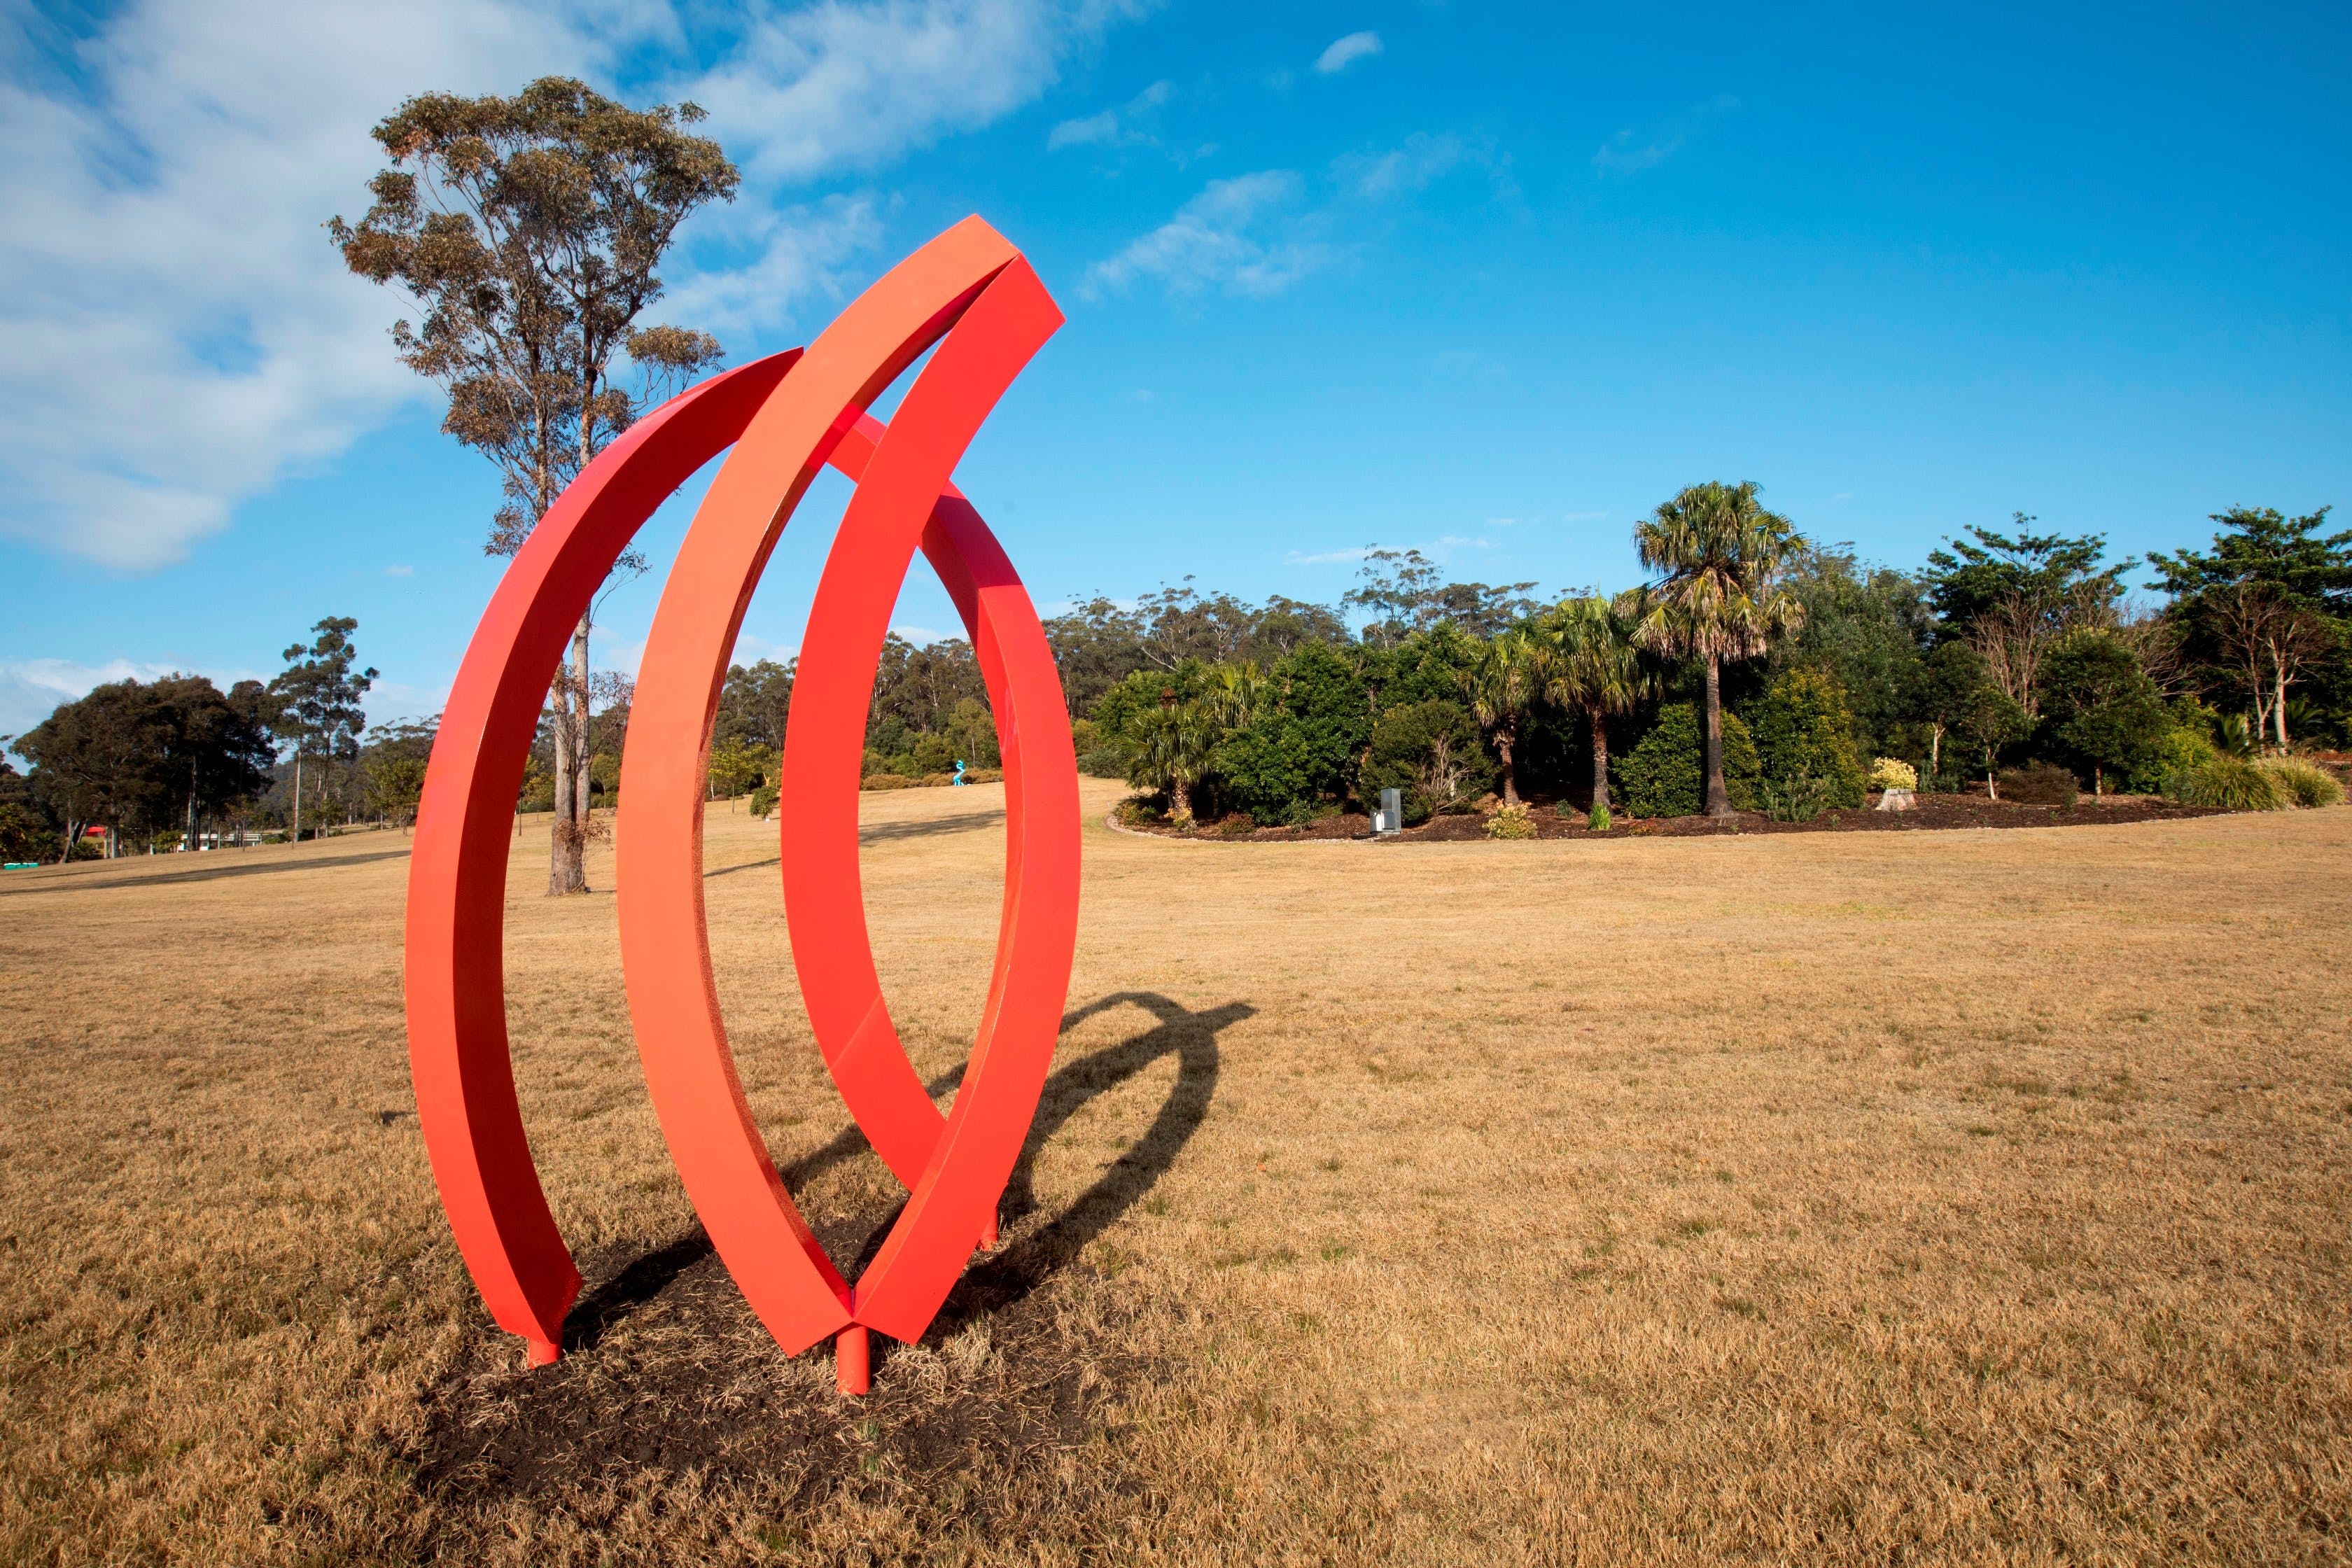 Sculpture for Clyde - Accommodation Nelson Bay